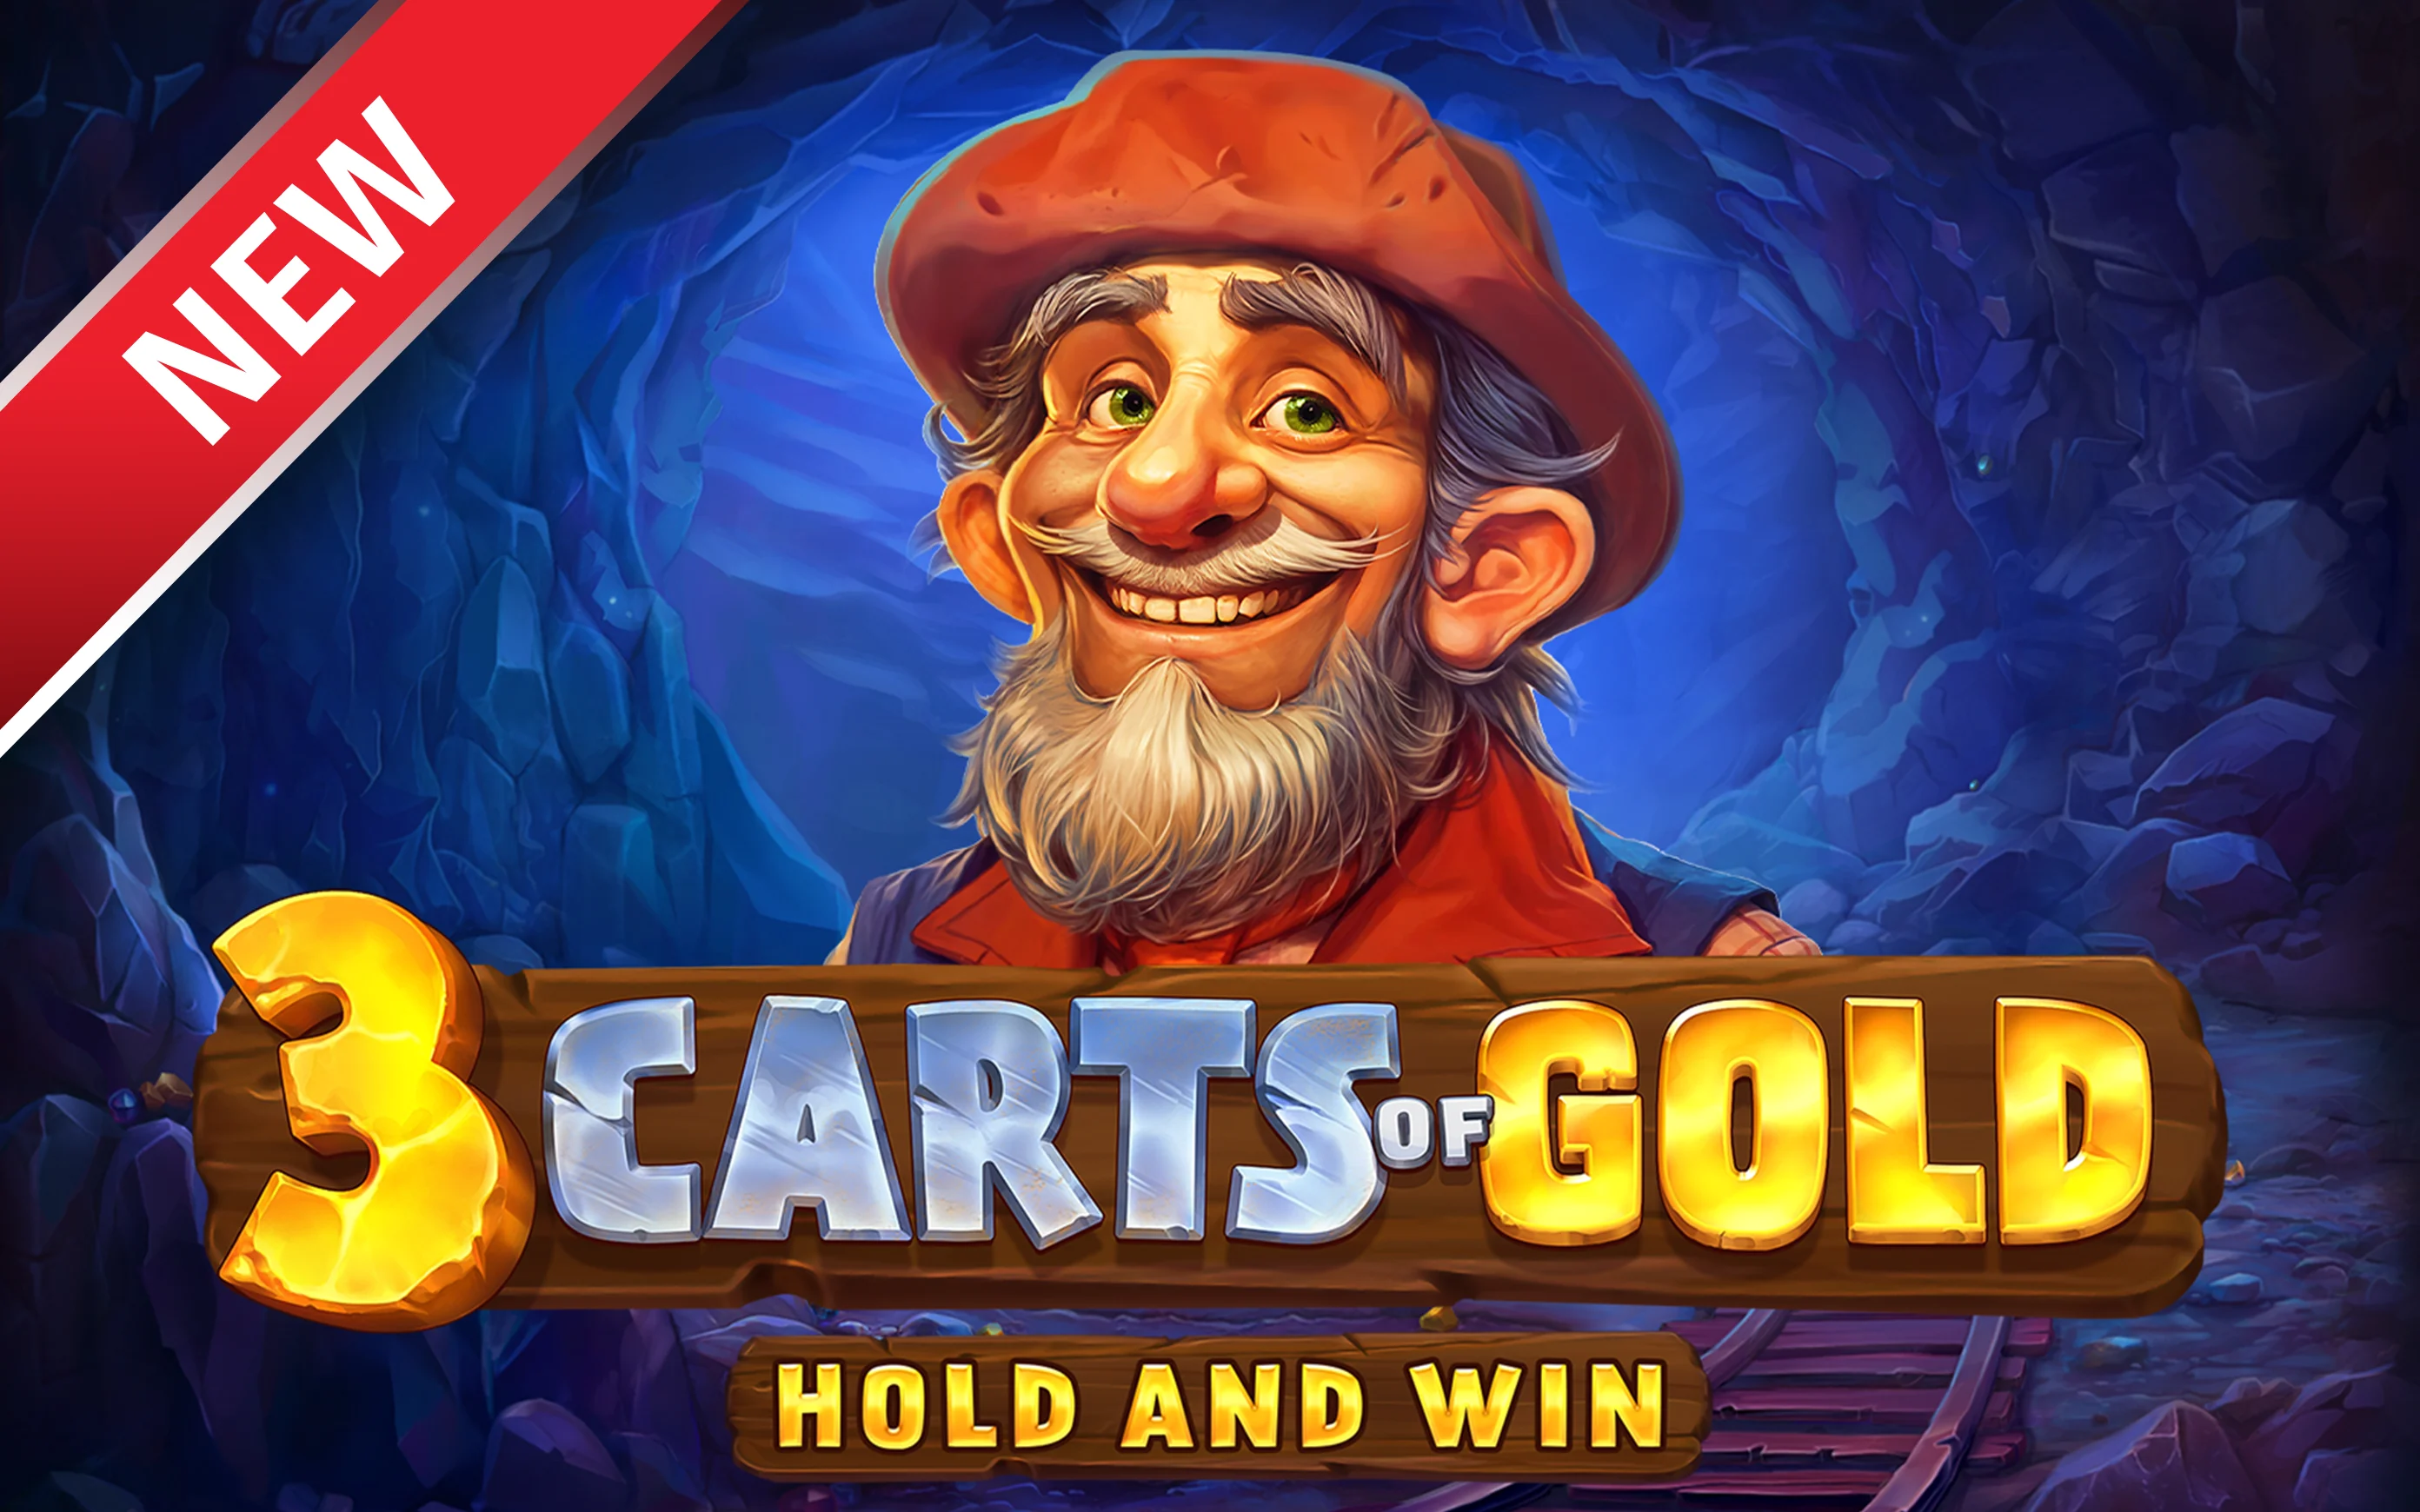 Jogue 3 Carts of Gold: Hold and Win no casino online Starcasino.be 